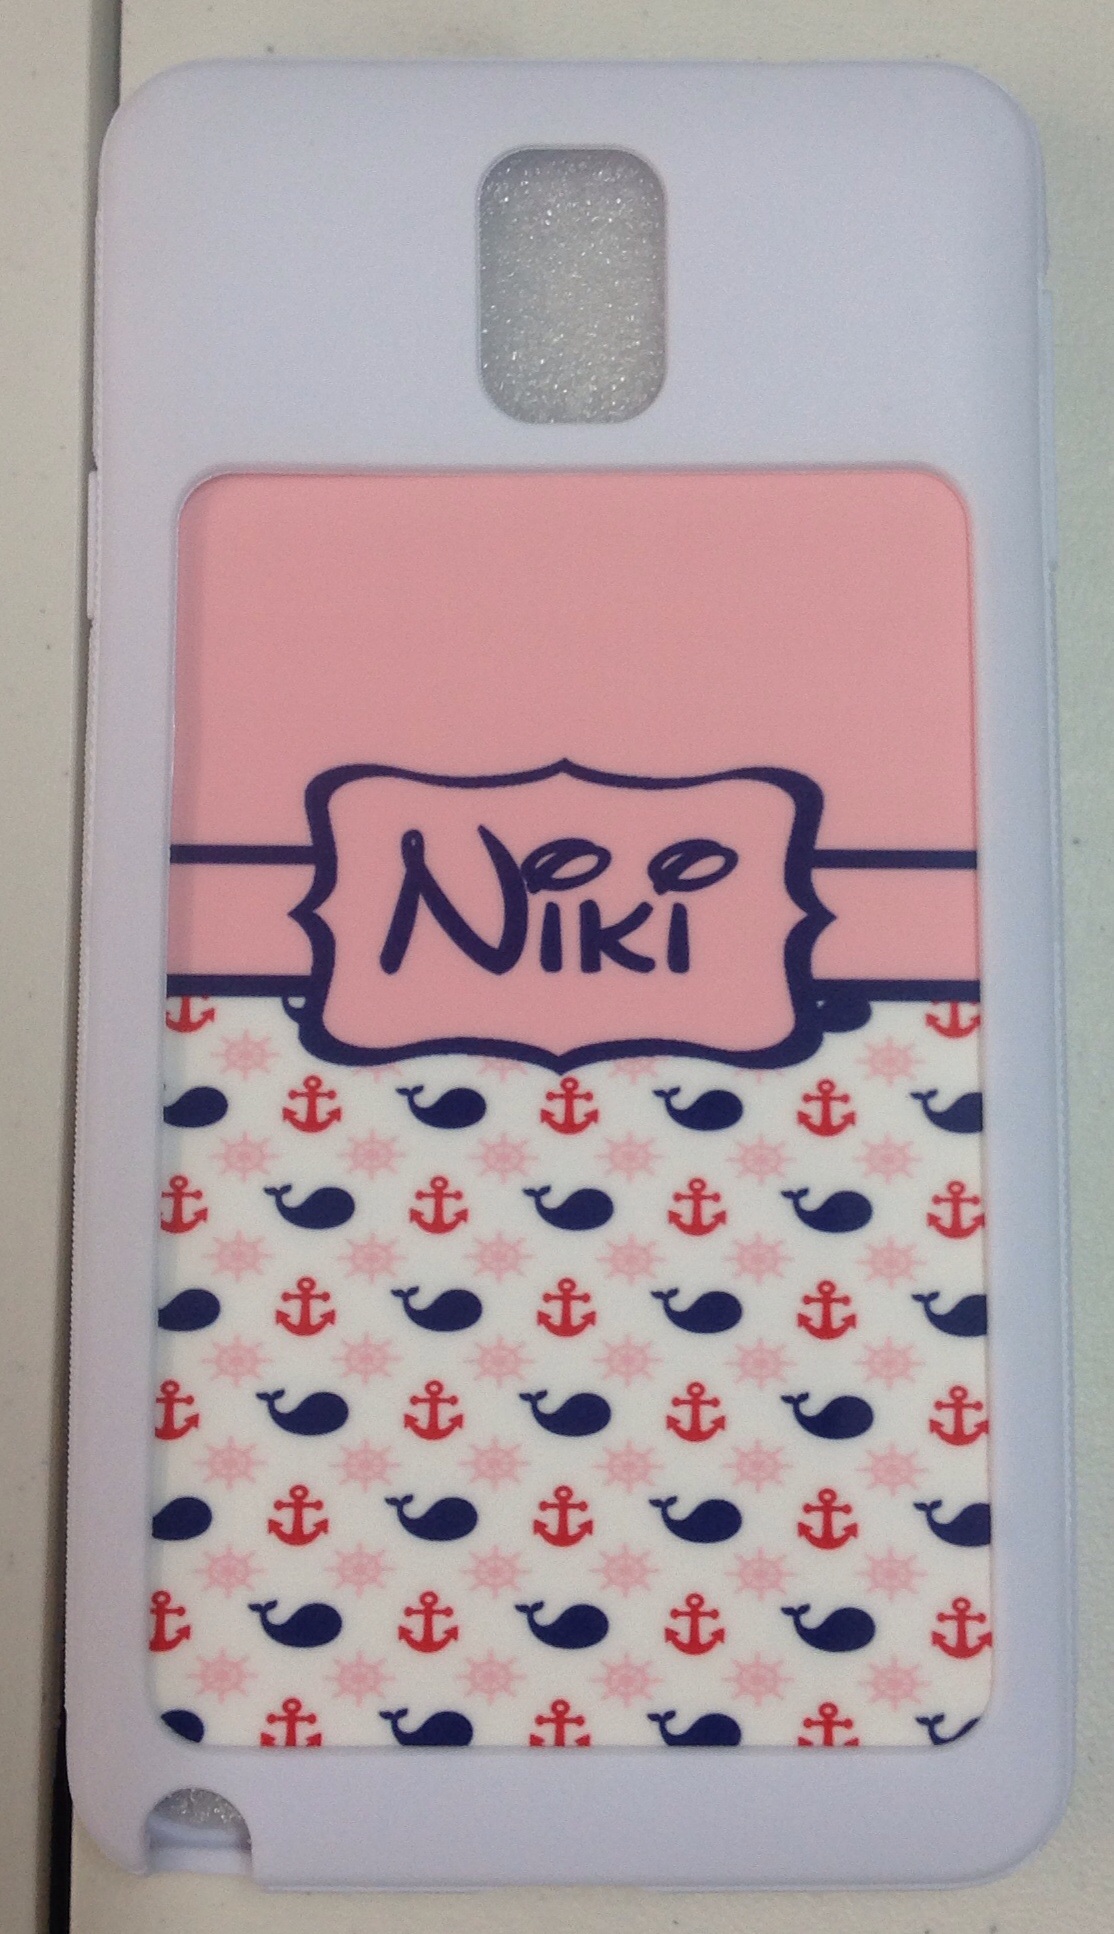 Samsung note3 made with sublimation printing